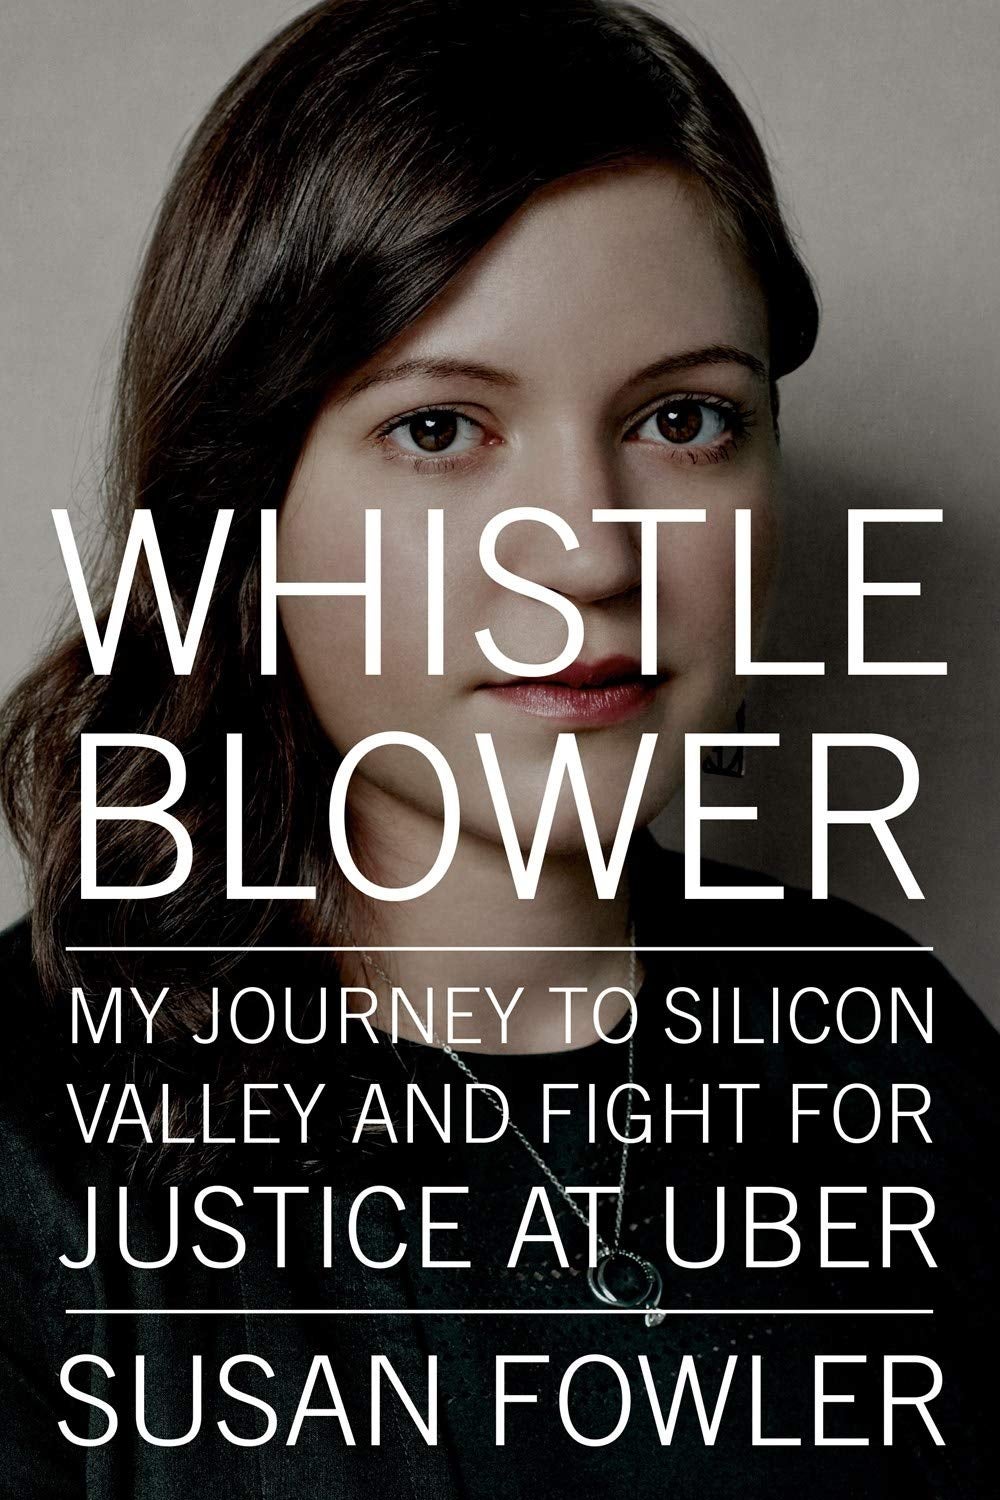 The cover of Whistleblower featuring Susan Fowler